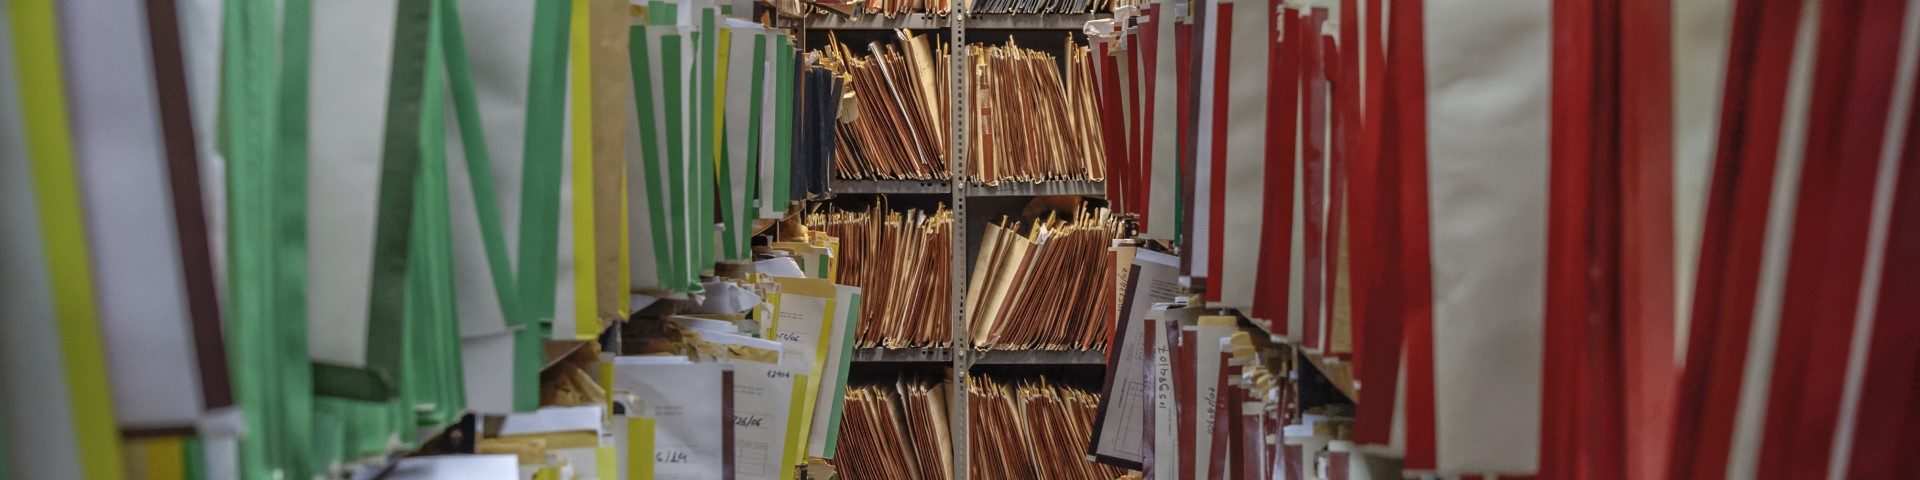 Several cabinets filled with files.